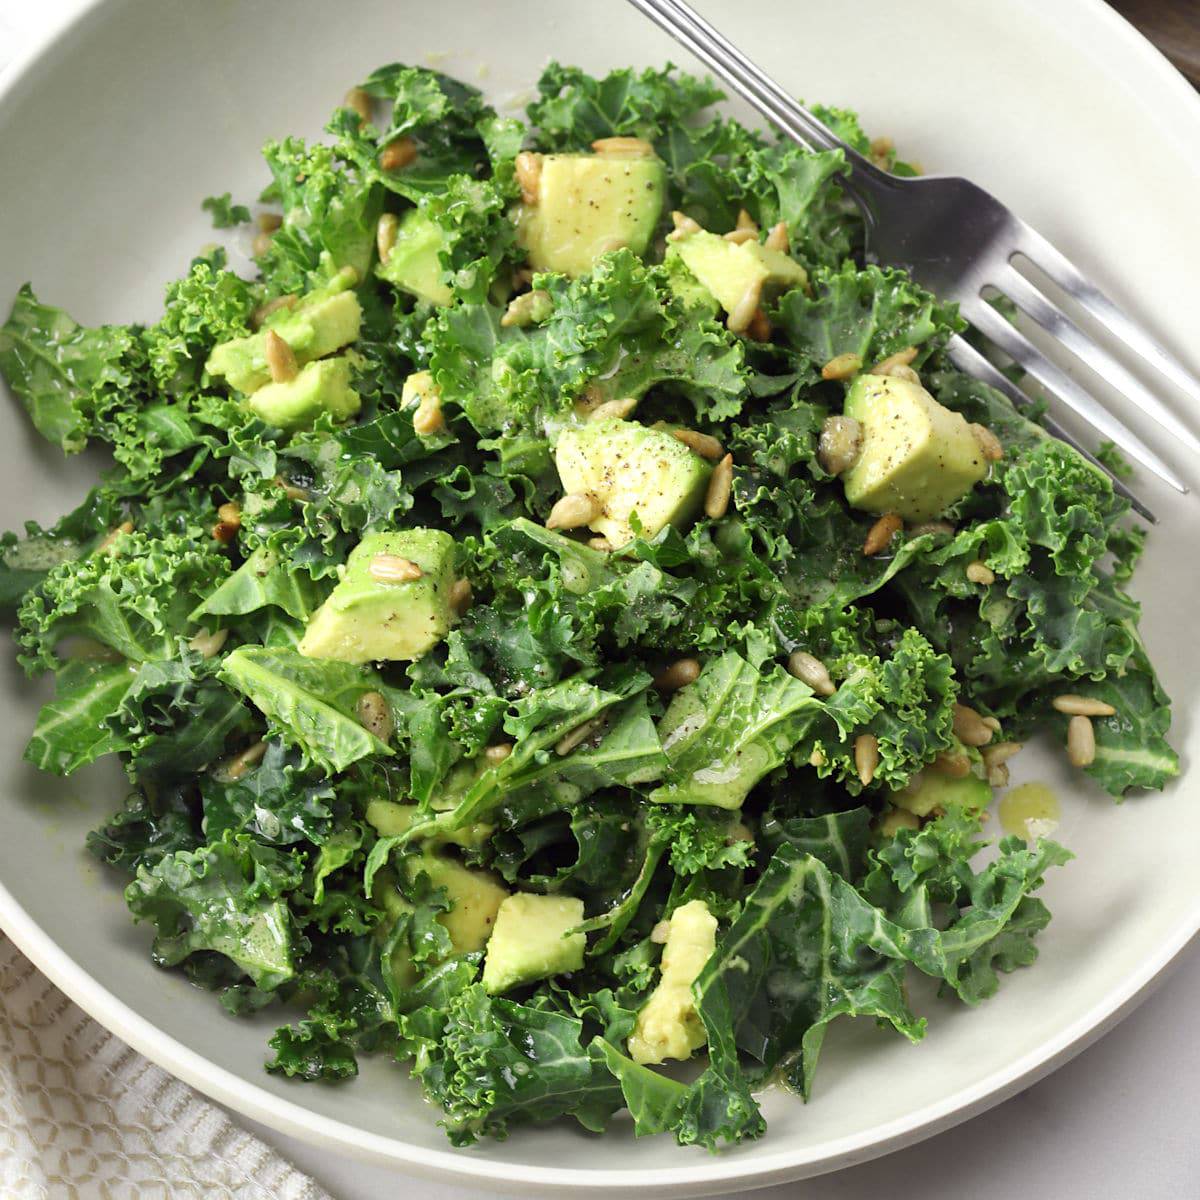 Overhead view of chopped kale avocado salad with homemade vinaigrette in a white bowl.